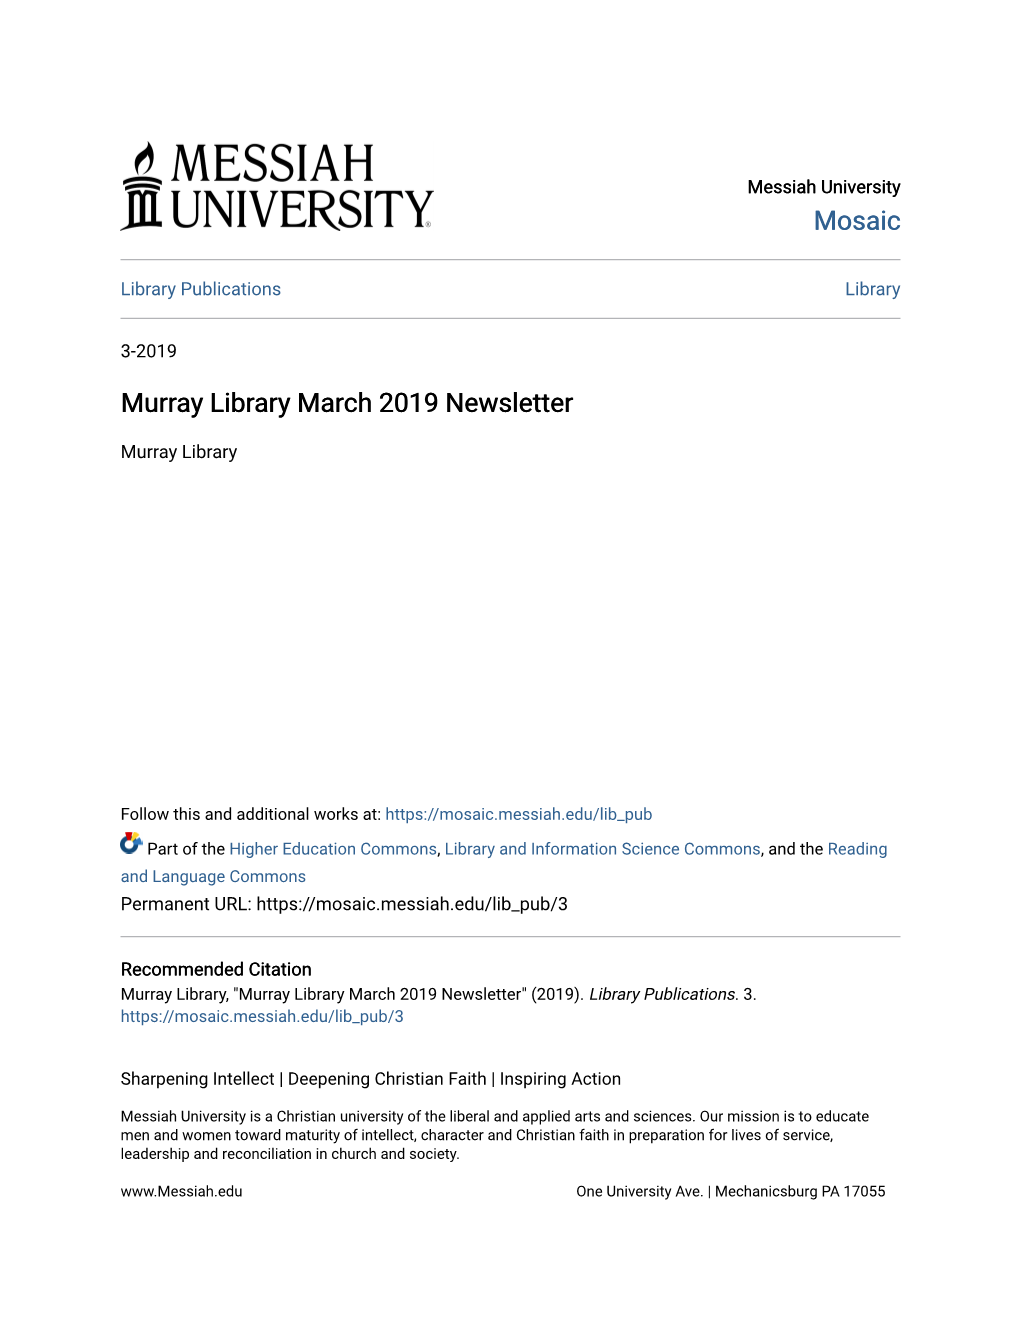 Murray Library March 2019 Newsletter